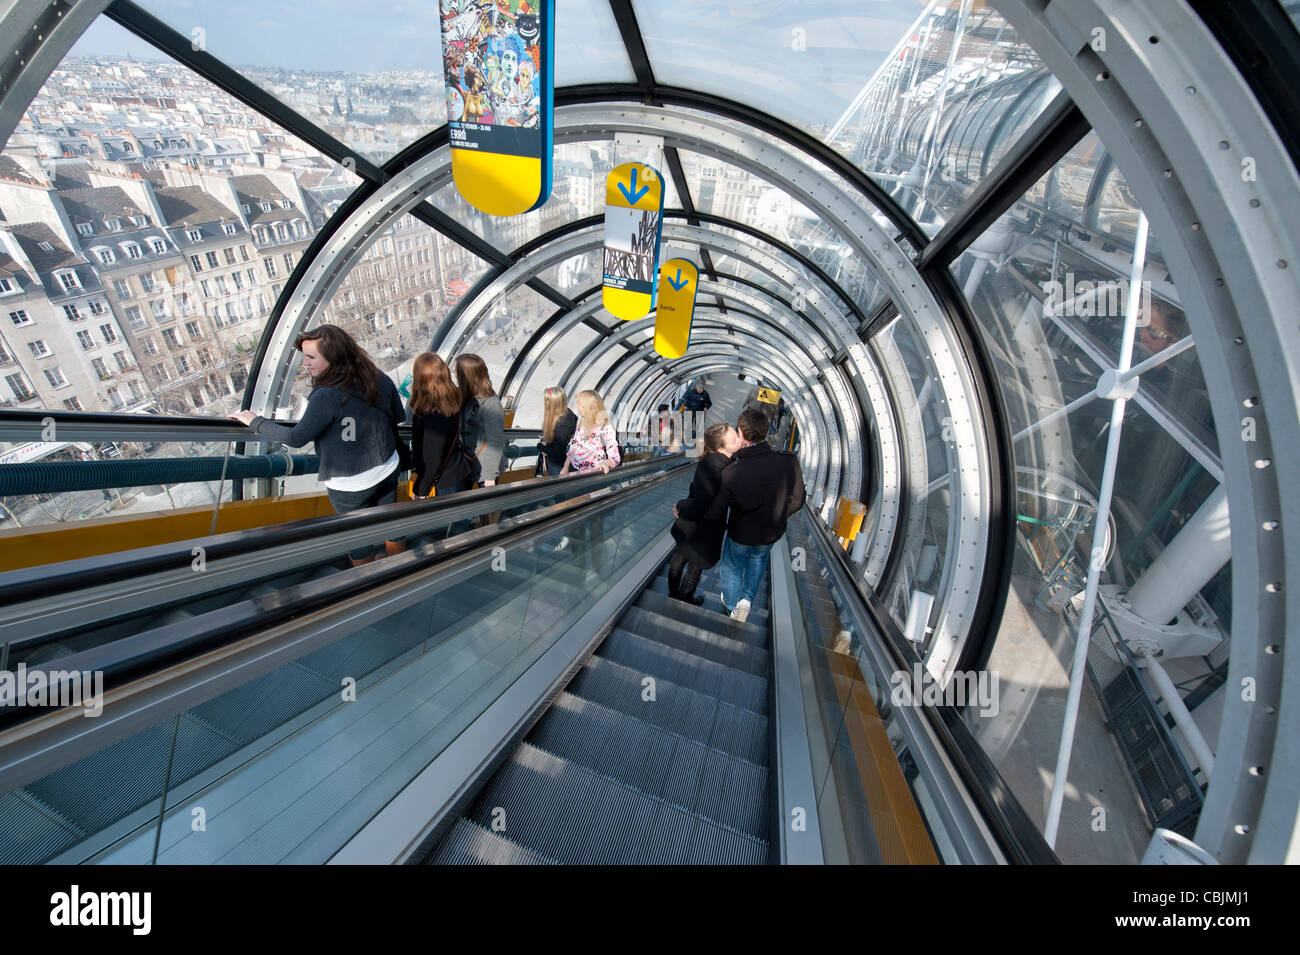 The escalator of the Centre Georges Pompidou in Paris, France. Stock Photo